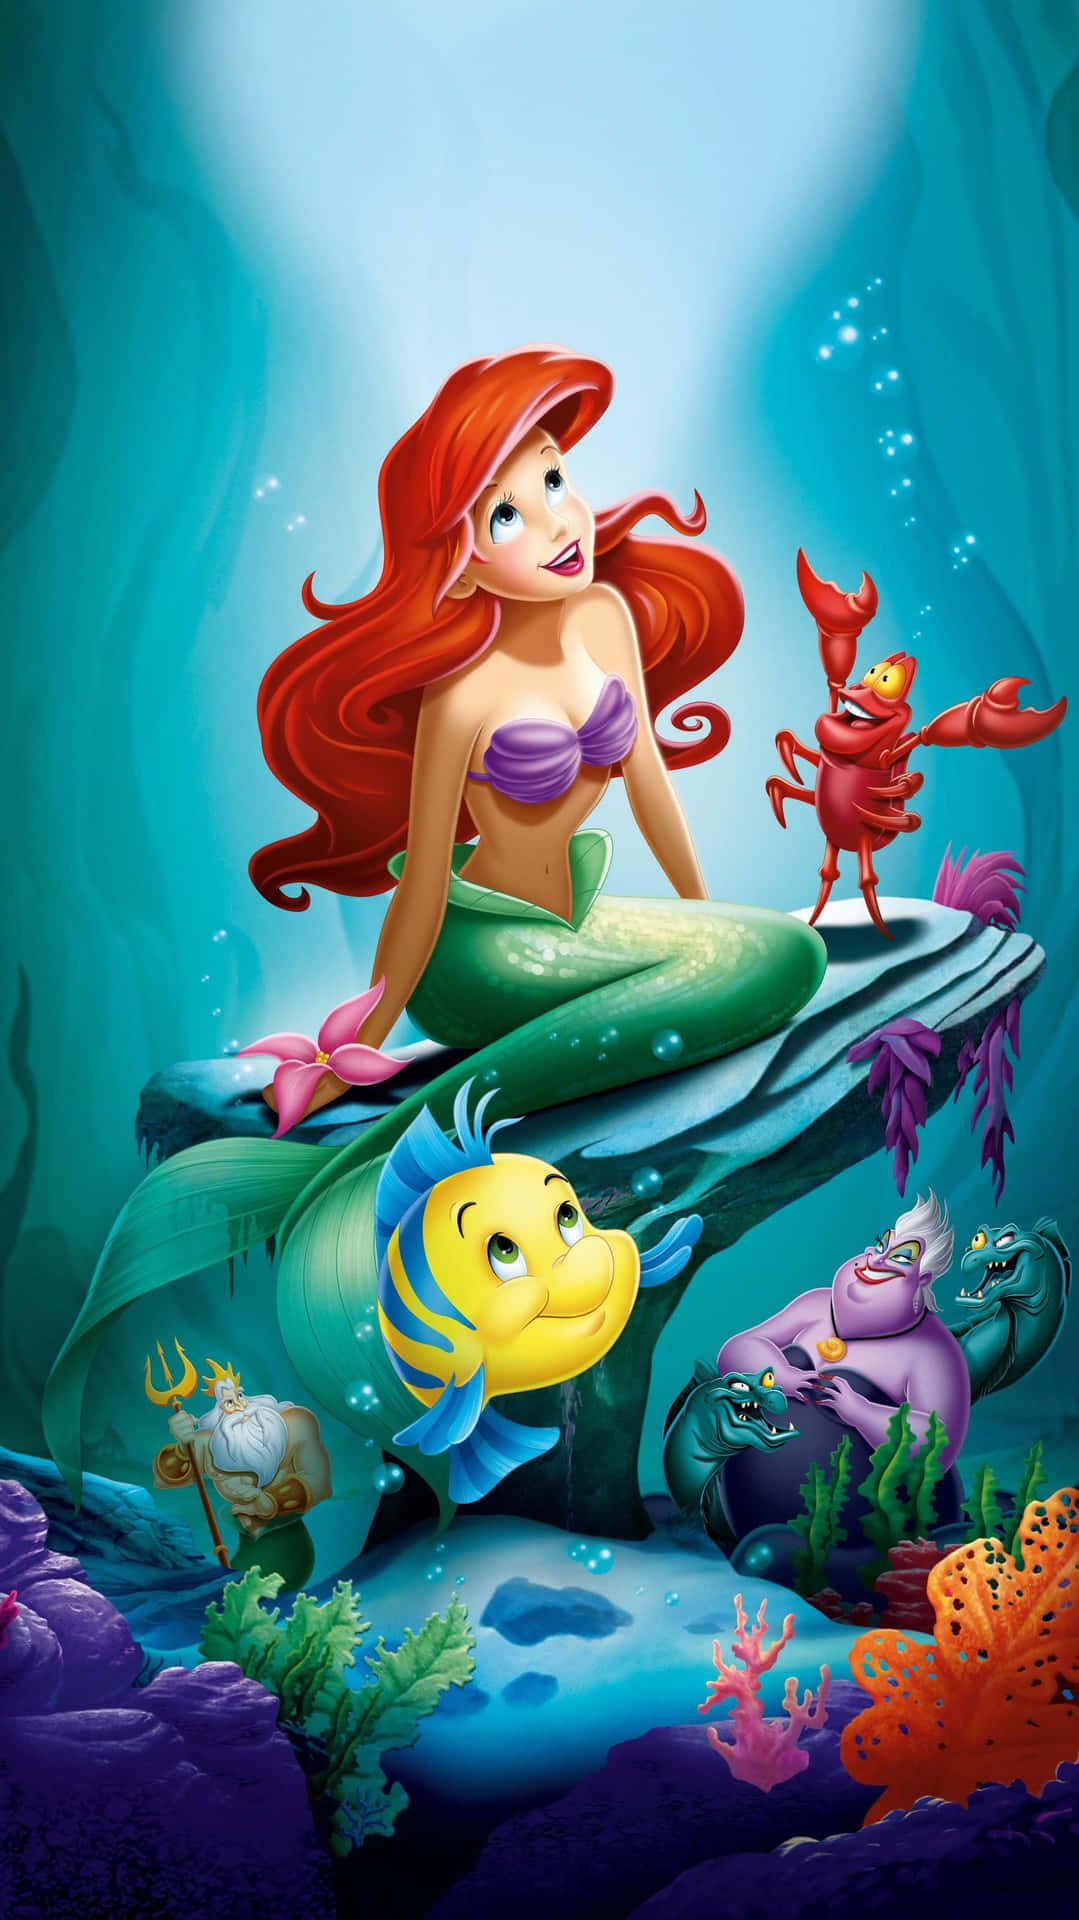 Ariel singing along in the vibrant underwater world of The Little Mermaid Wallpaper